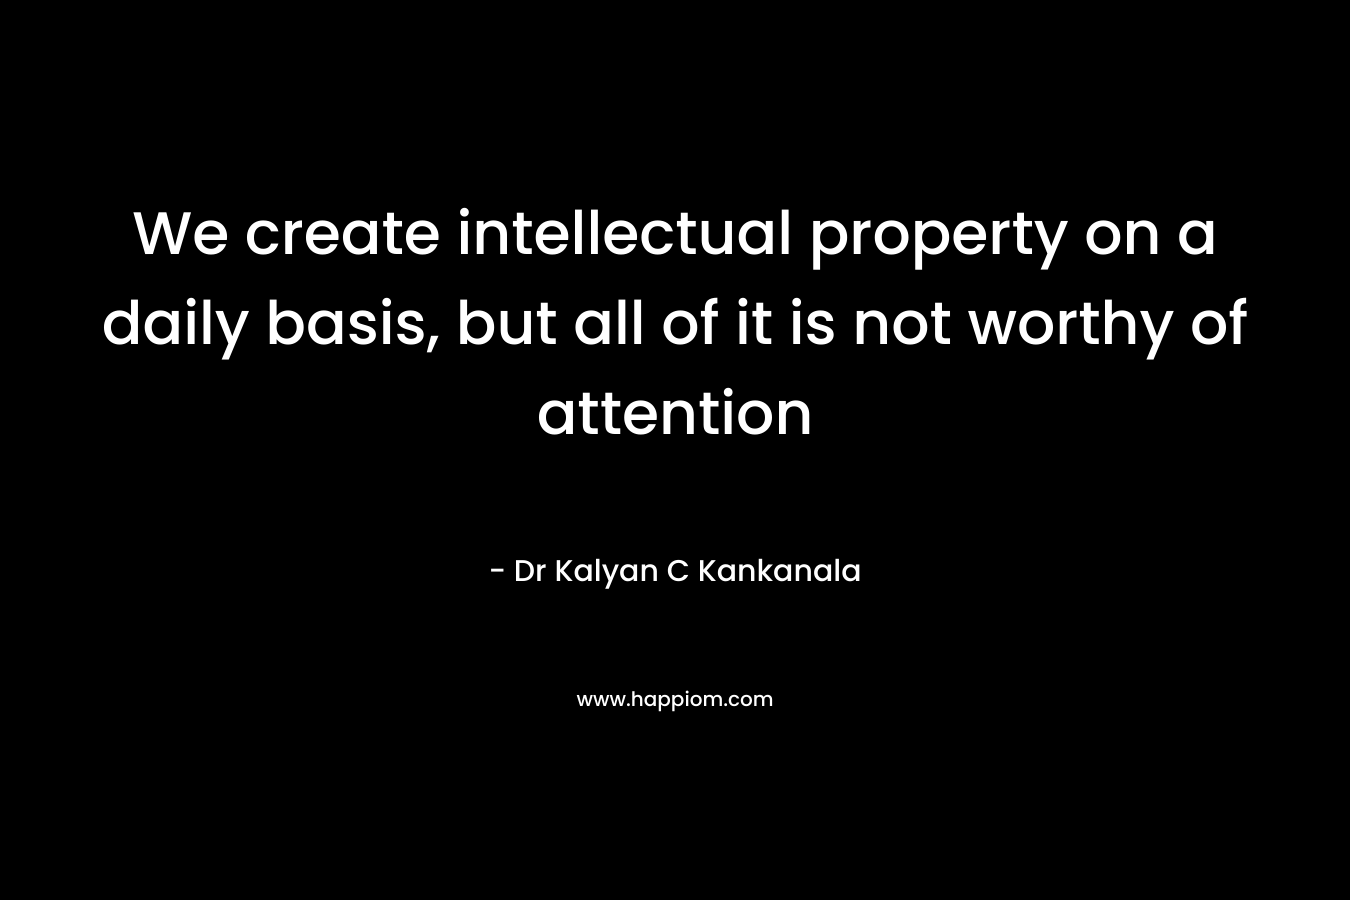 We create intellectual property on a daily basis, but all of it is not worthy of attention